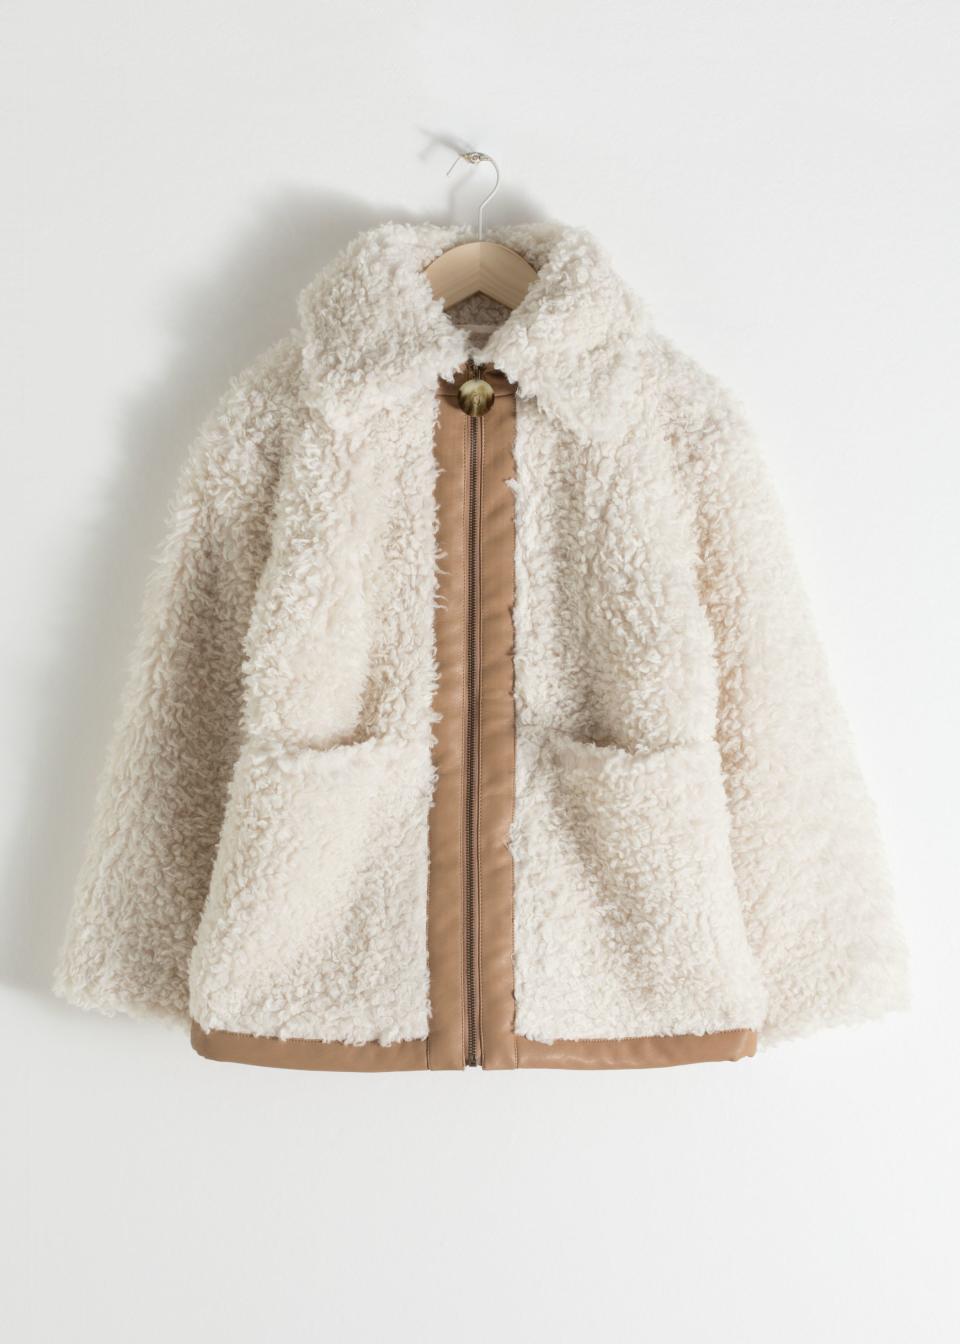 & Other Stories Faux Shearling Workwear Jacket